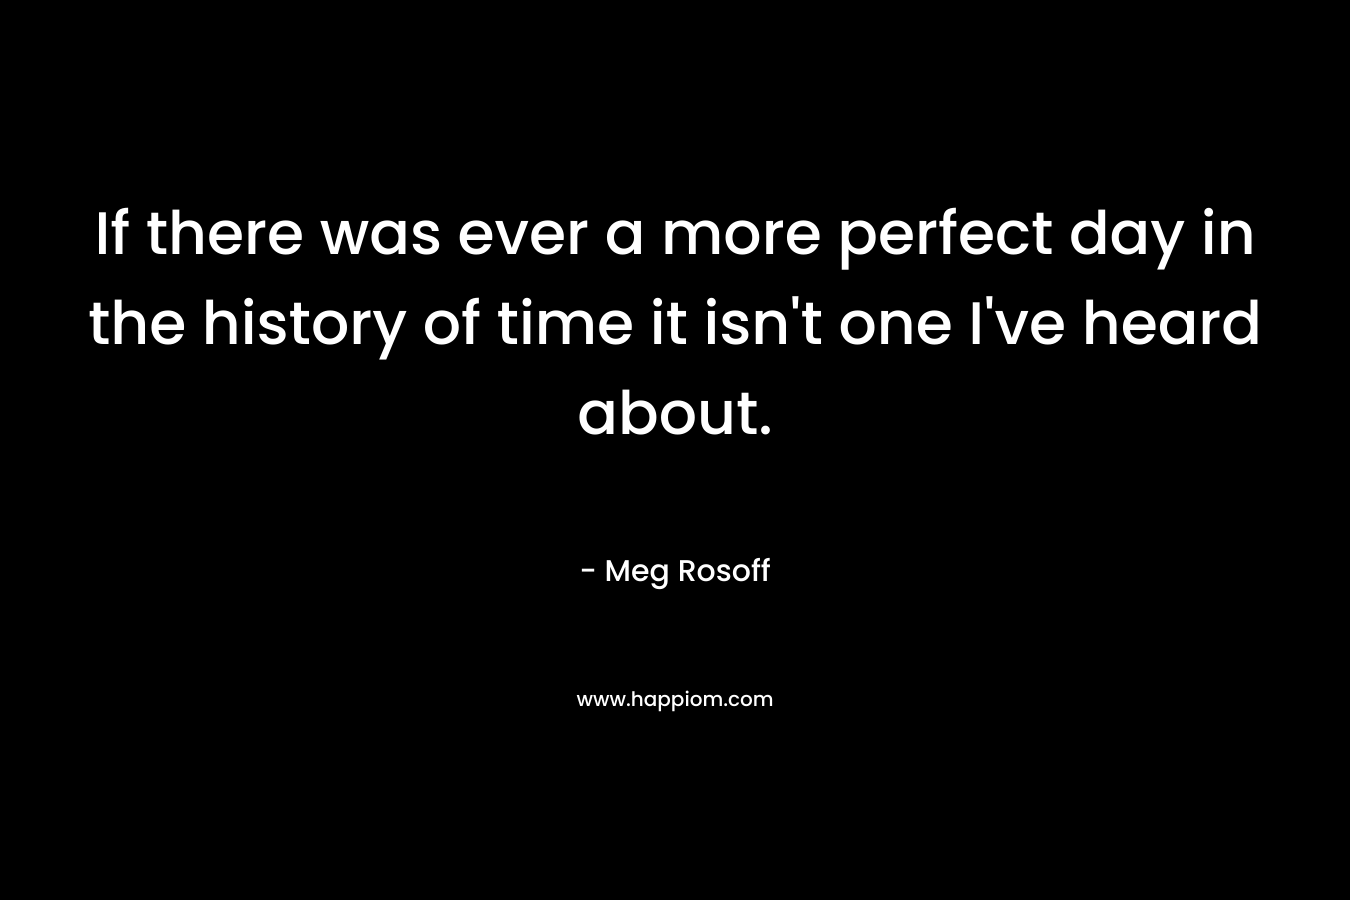 If there was ever a more perfect day in the history of time it isn’t one I’ve heard about. – Meg Rosoff